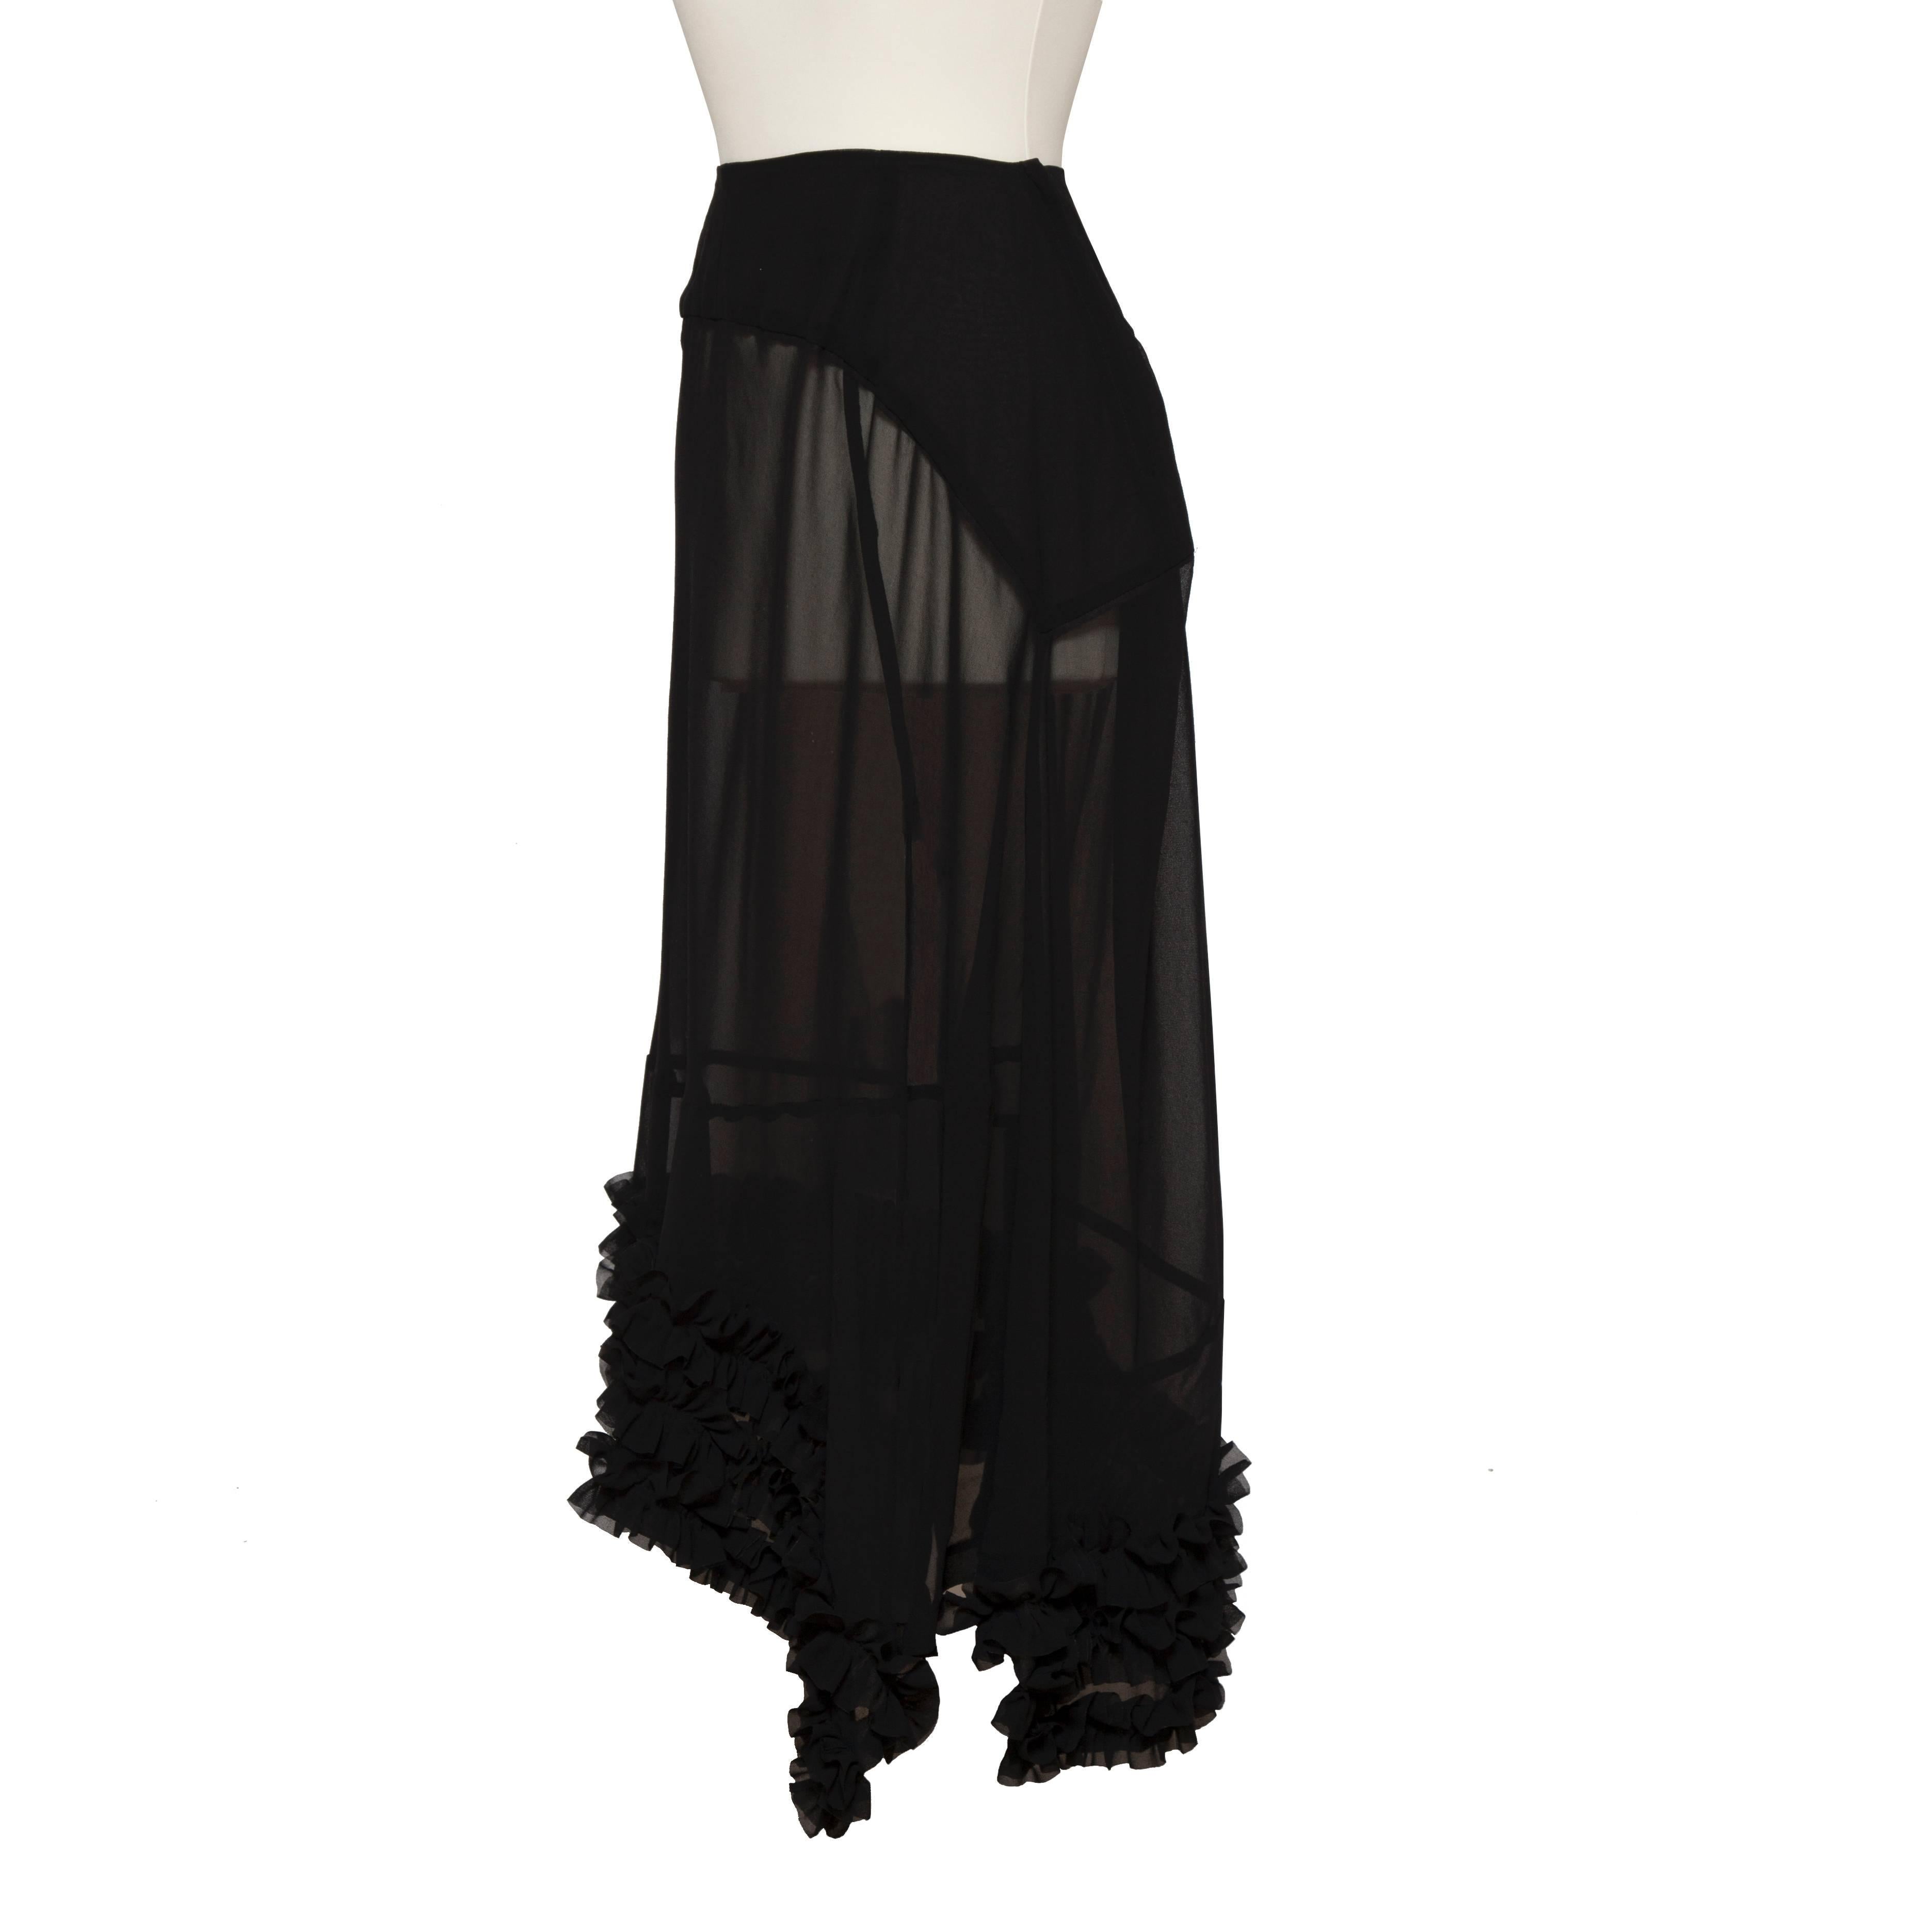 Comme des Garcons black sheer skirt. Ruffle edge detail gives extra heaviness in balance and movement - Beautifully cut. 
Measurements :
Waist : 68 cm
Total length : Approx. 92 cm